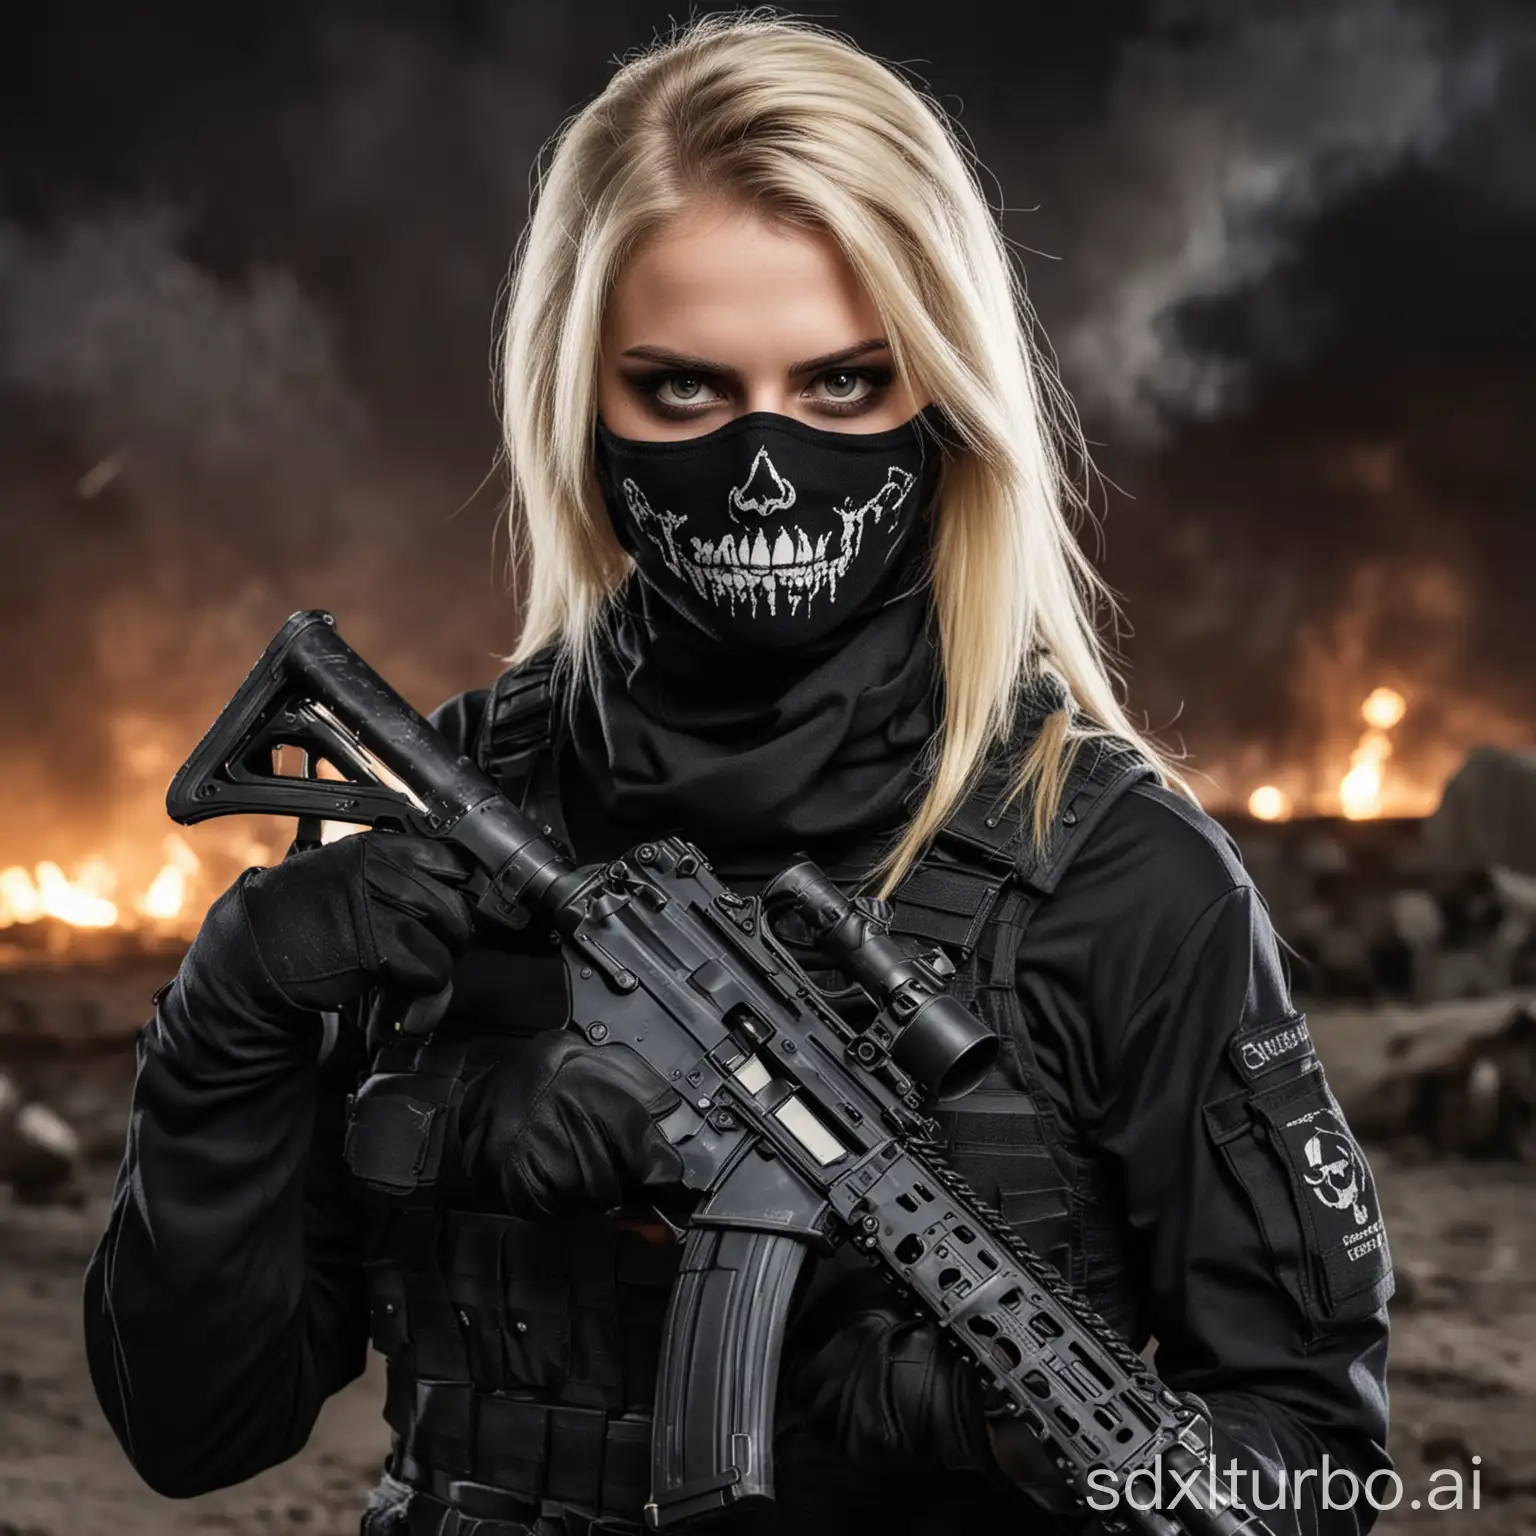 Beautiful blonde girl with very fair skin in black black tactical military uniform using a black balaclava with skull pattern, black tactical gloves, carrying an assault rifle, night and explosions in the background 